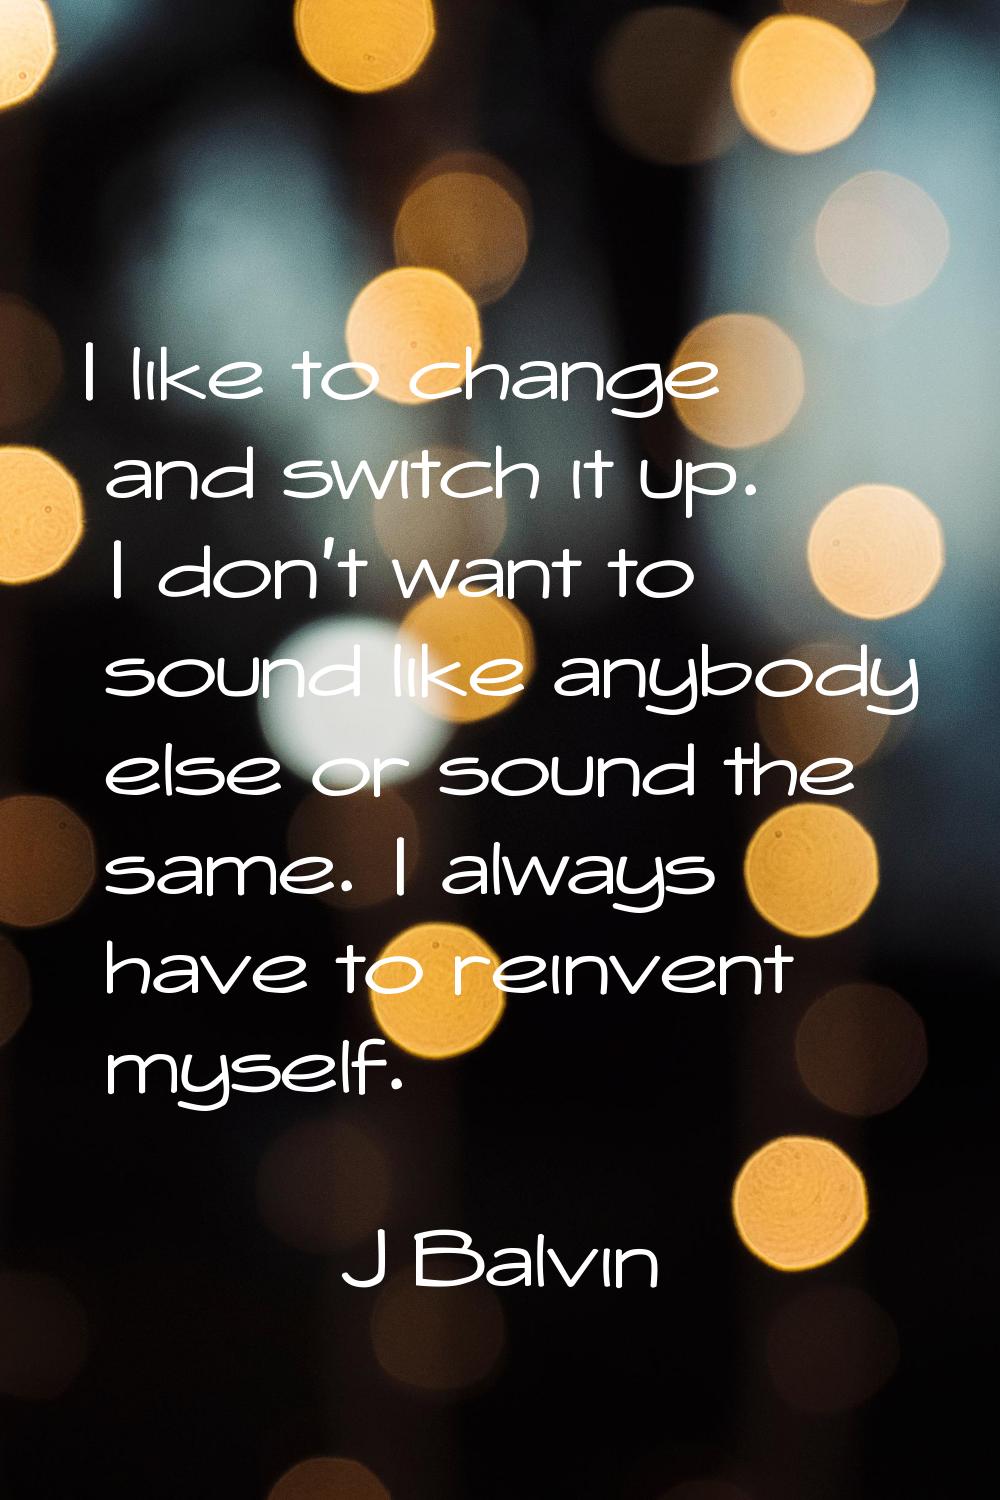 I like to change and switch it up. I don't want to sound like anybody else or sound the same. I alw